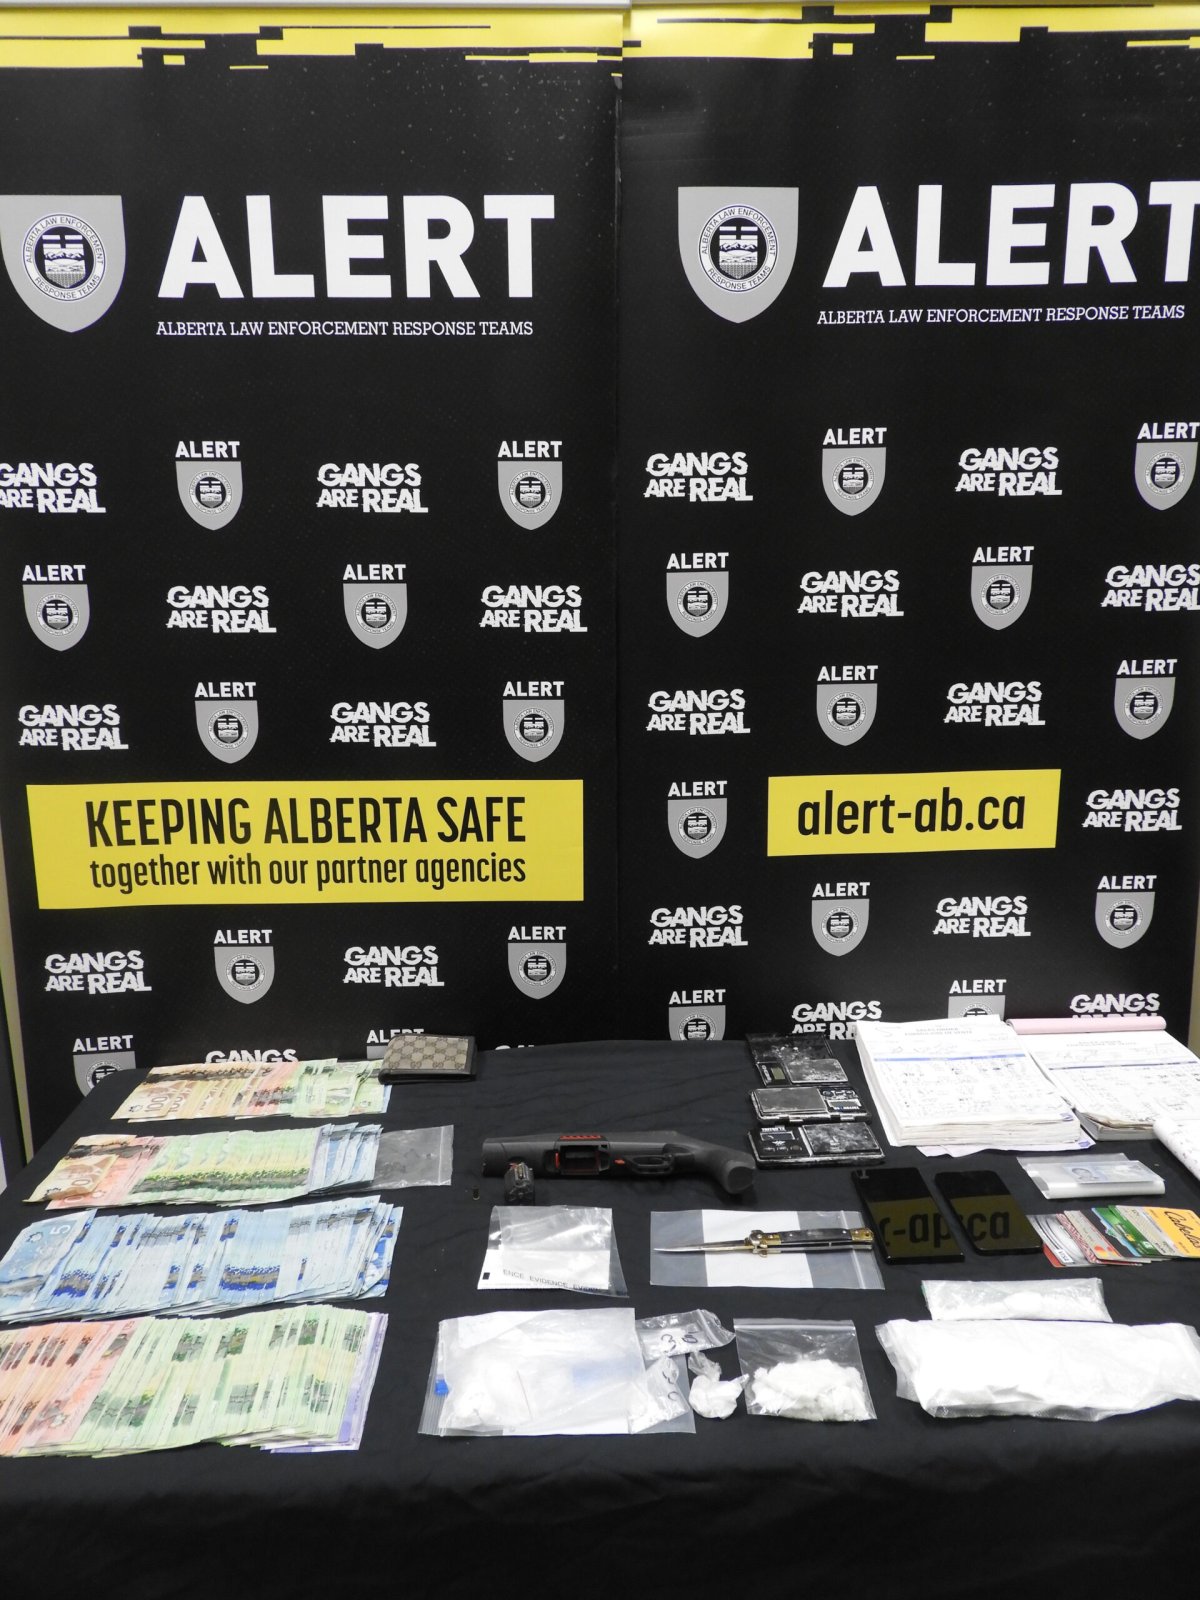 Earlier this month, ALERT Fort McMurray’s organized crime team began investigating cocaine trafficking in the community.